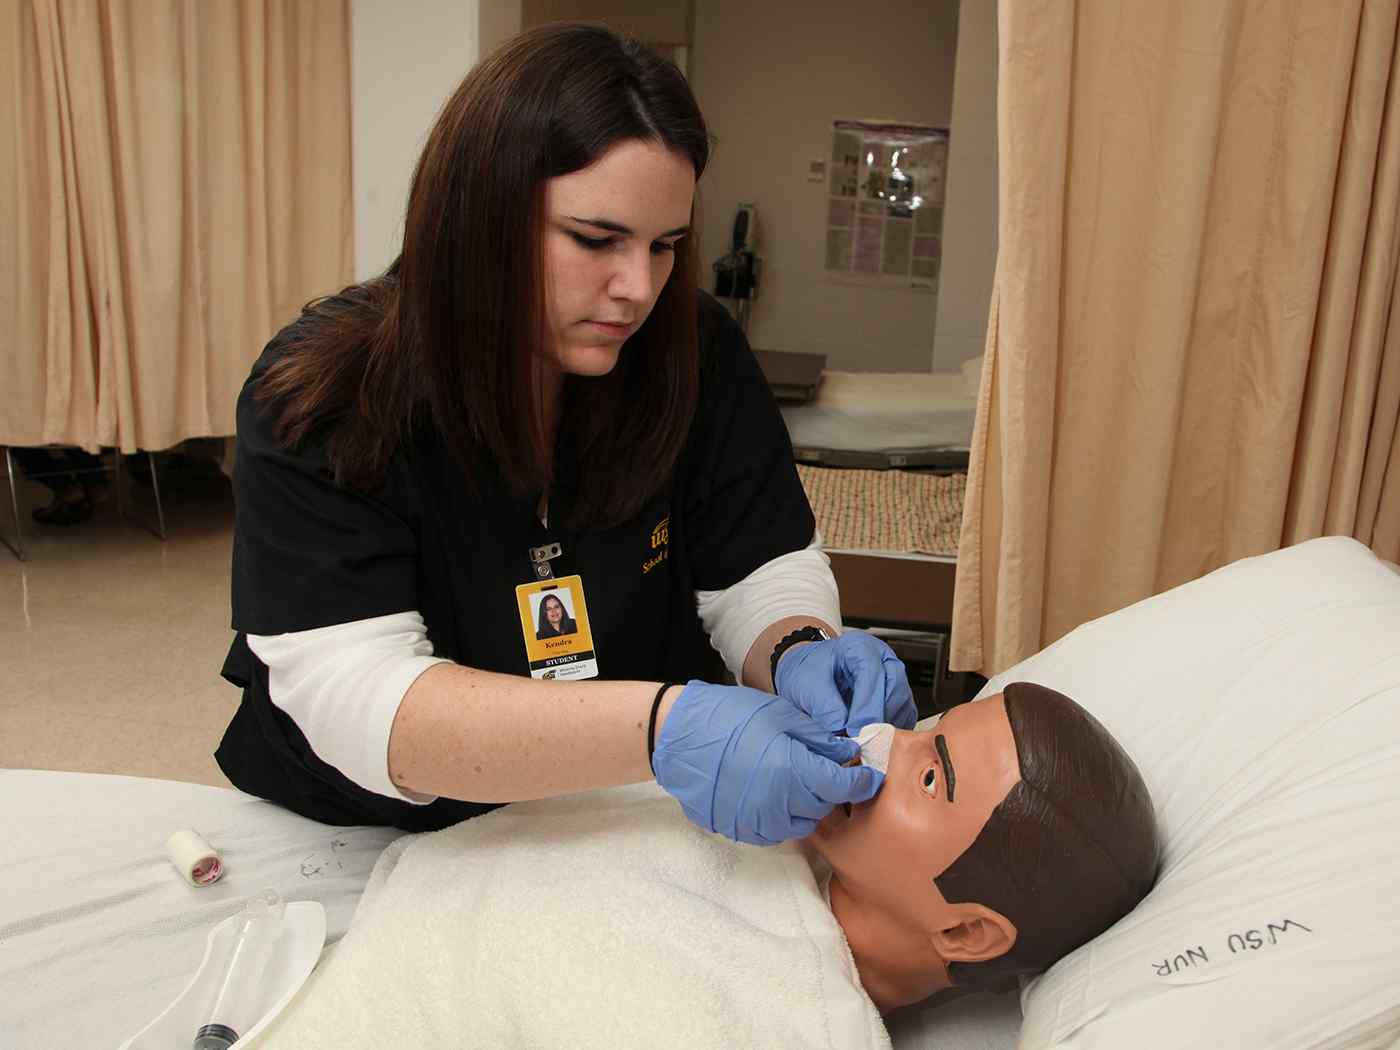 A nursing student works with a health mannequin